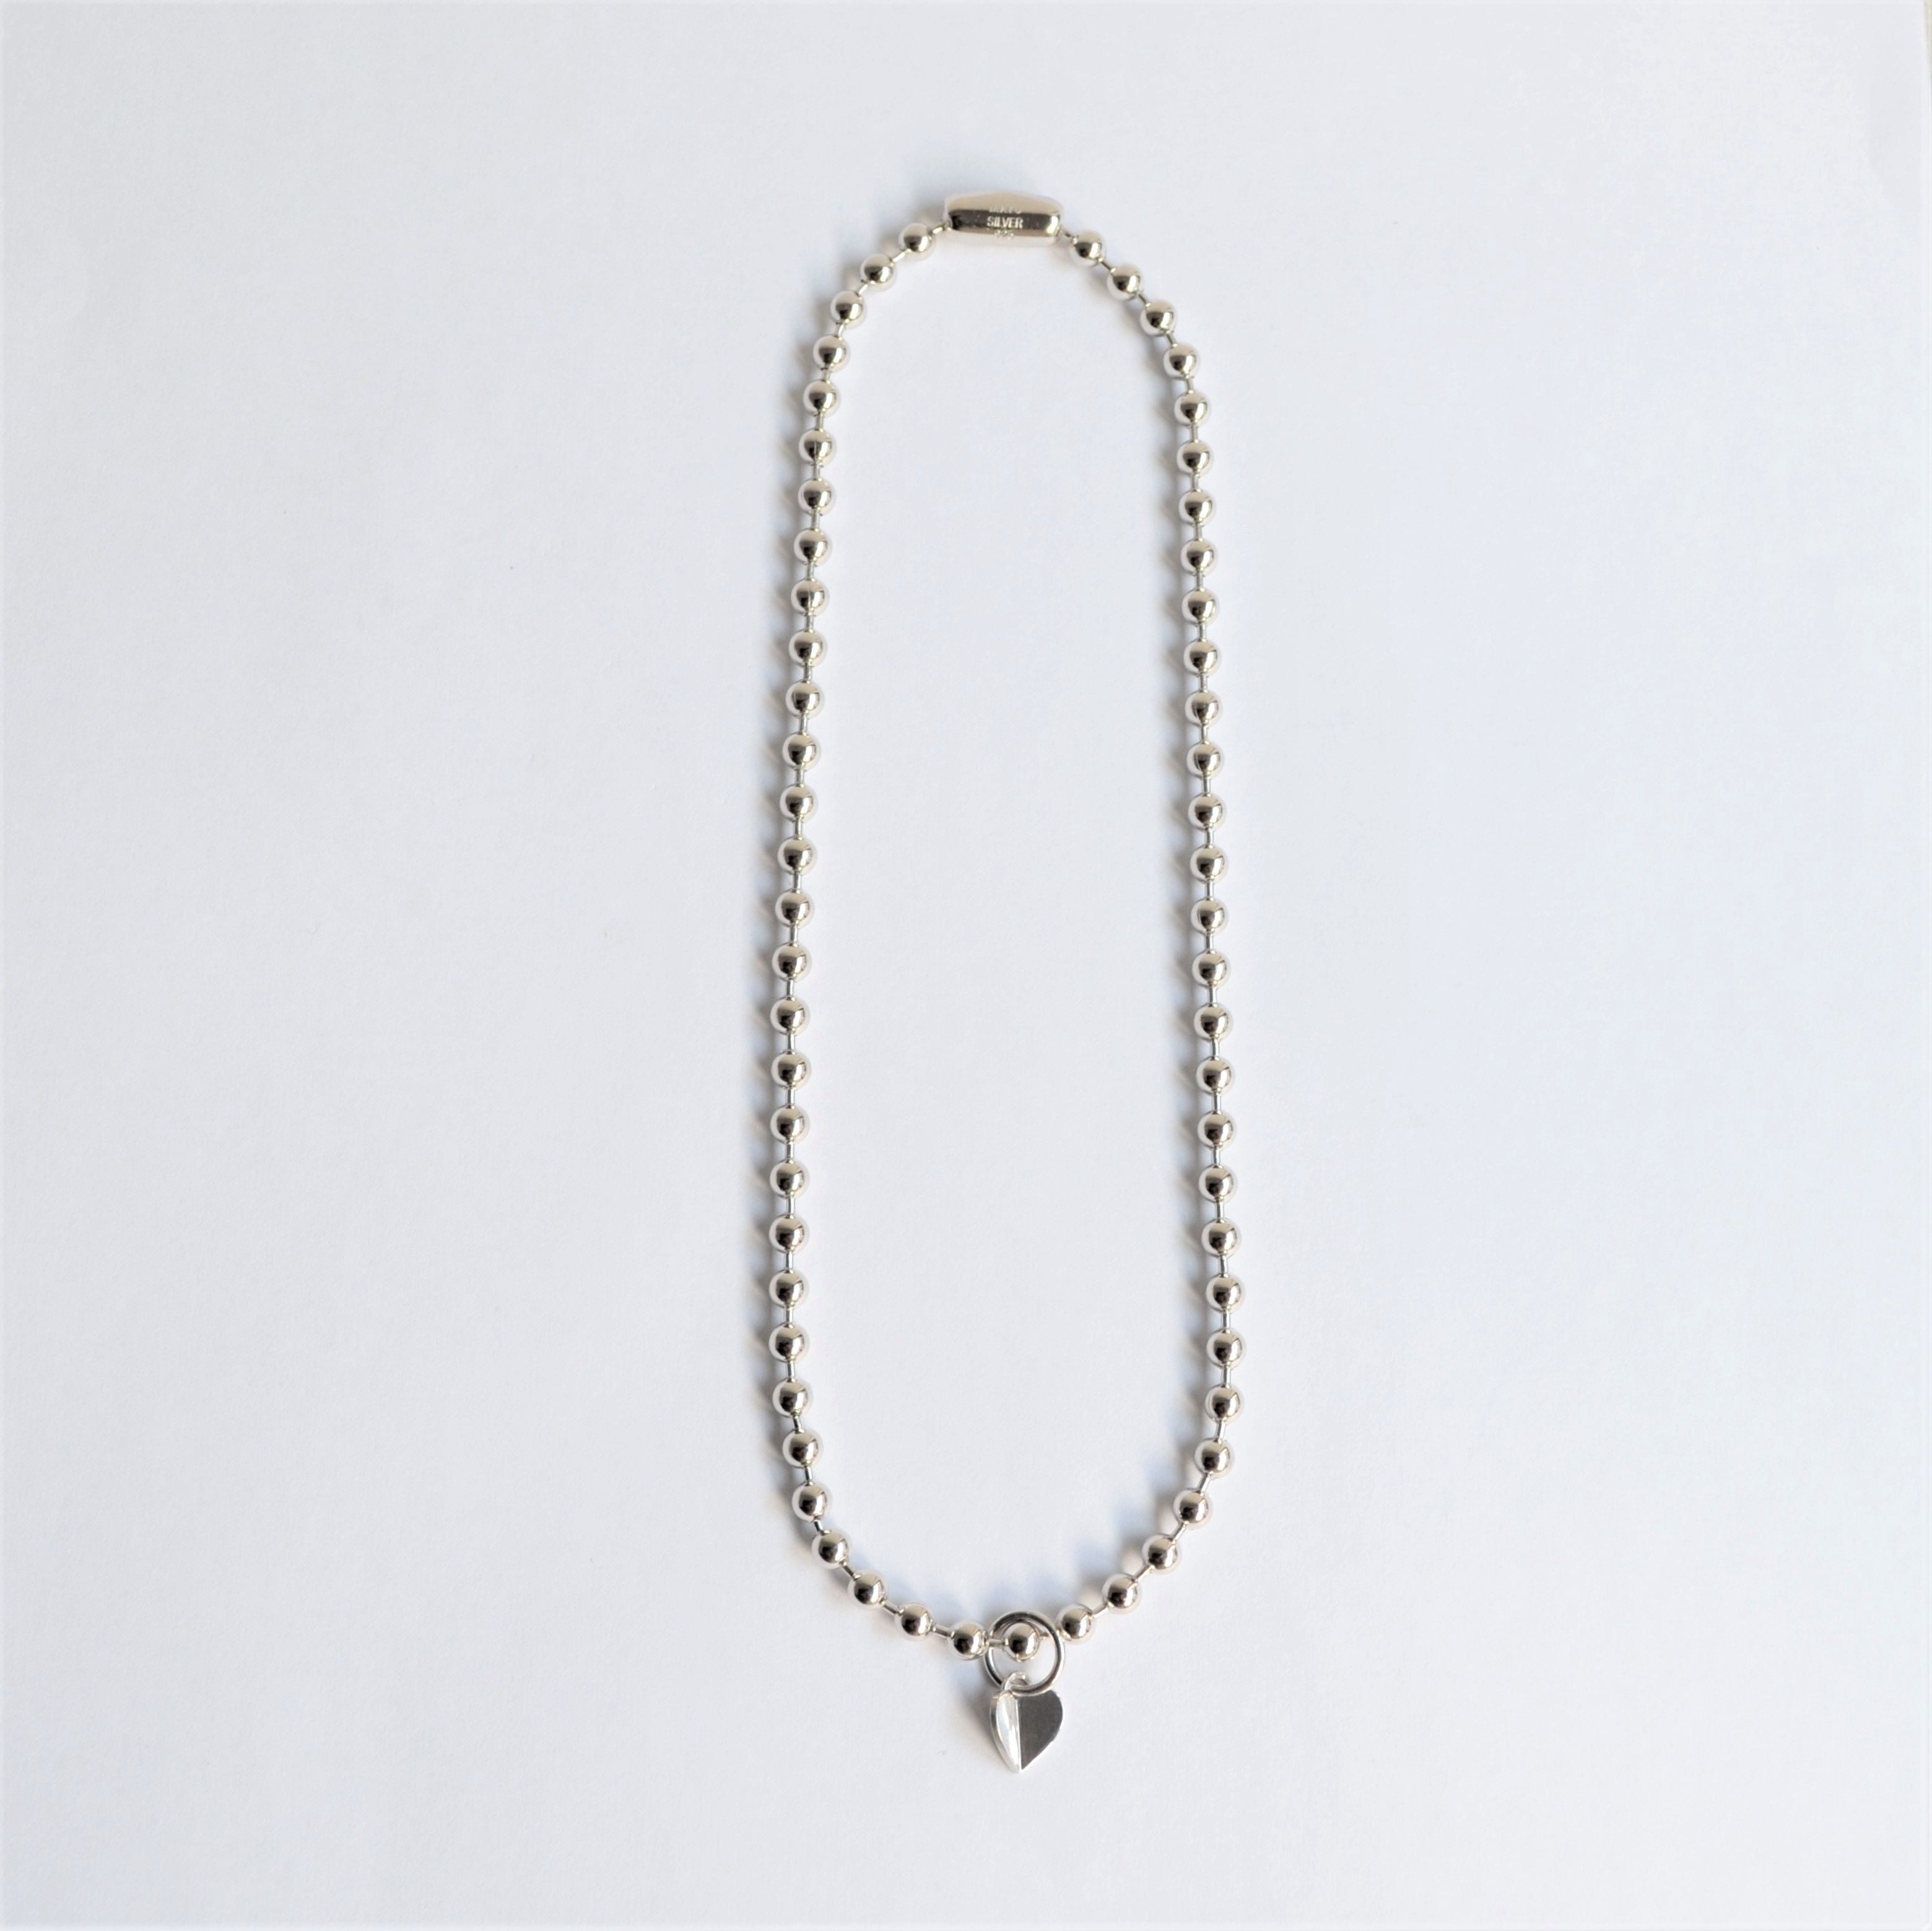 5mm ball chain necklace (silver) – MAYU online store